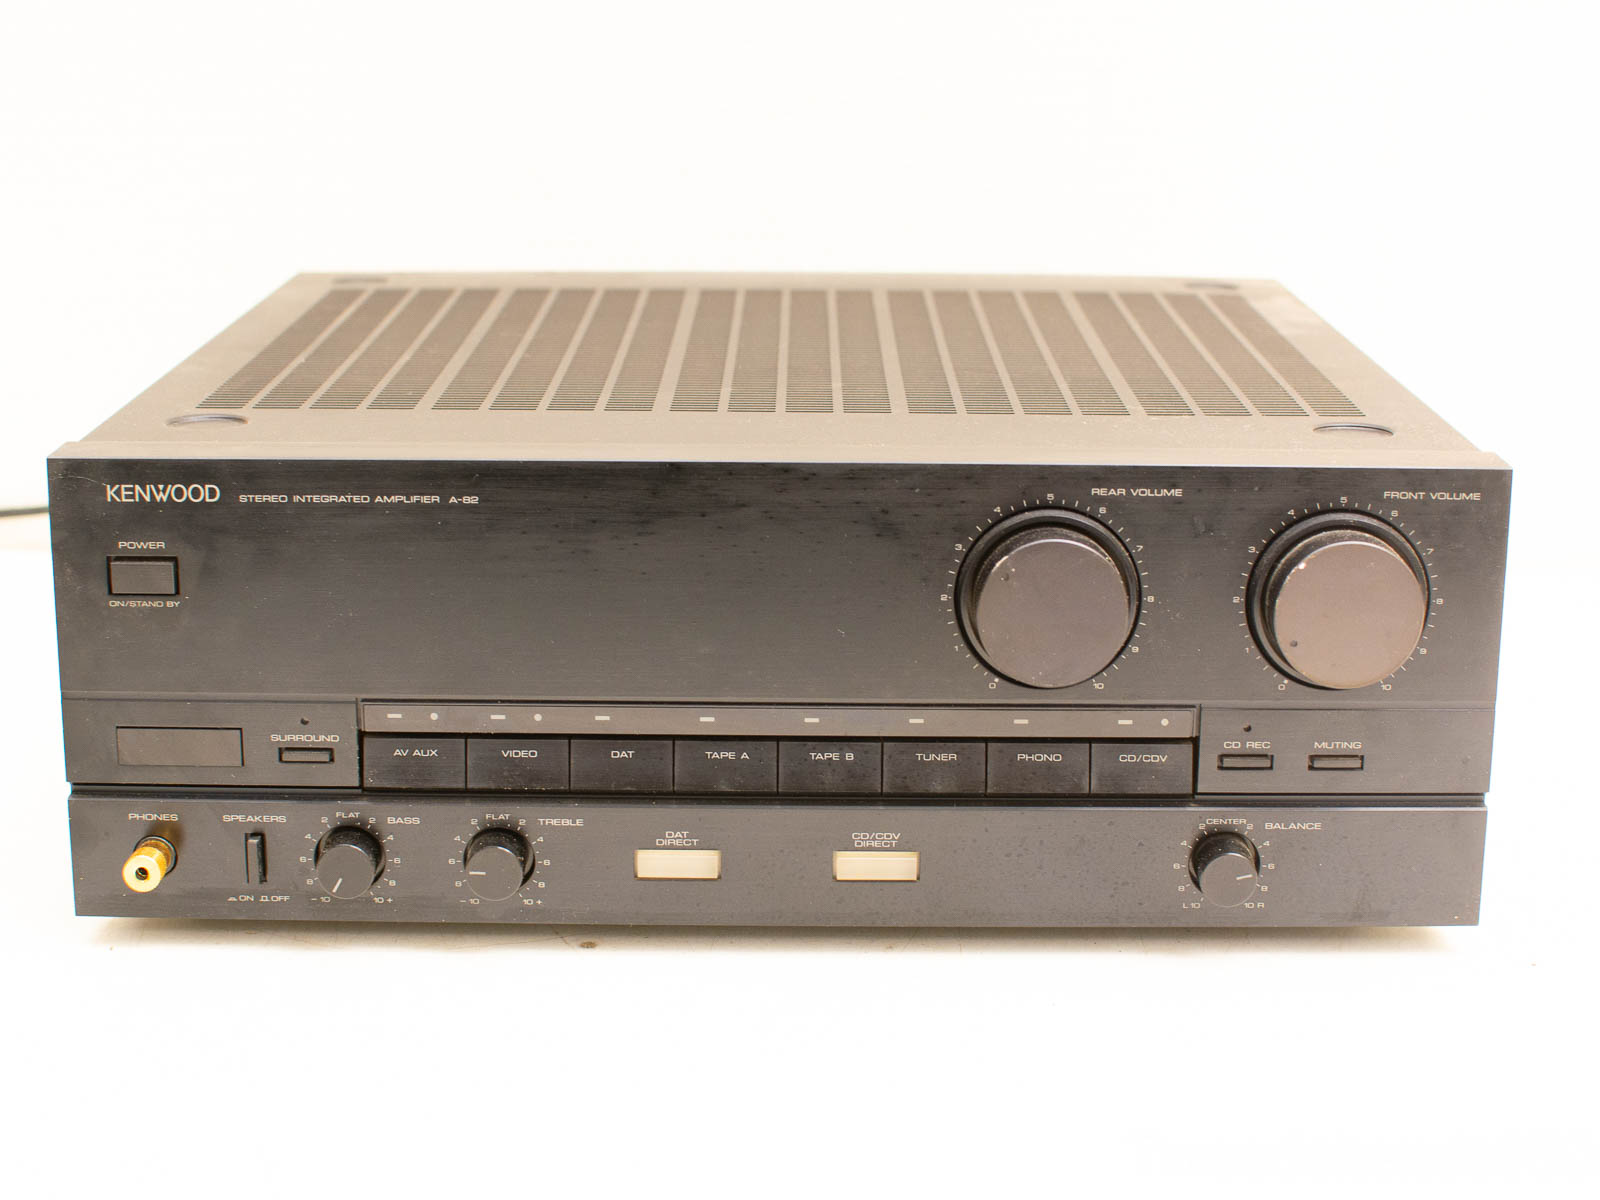 Kenwood stereo integrated amplifier A-82 32136